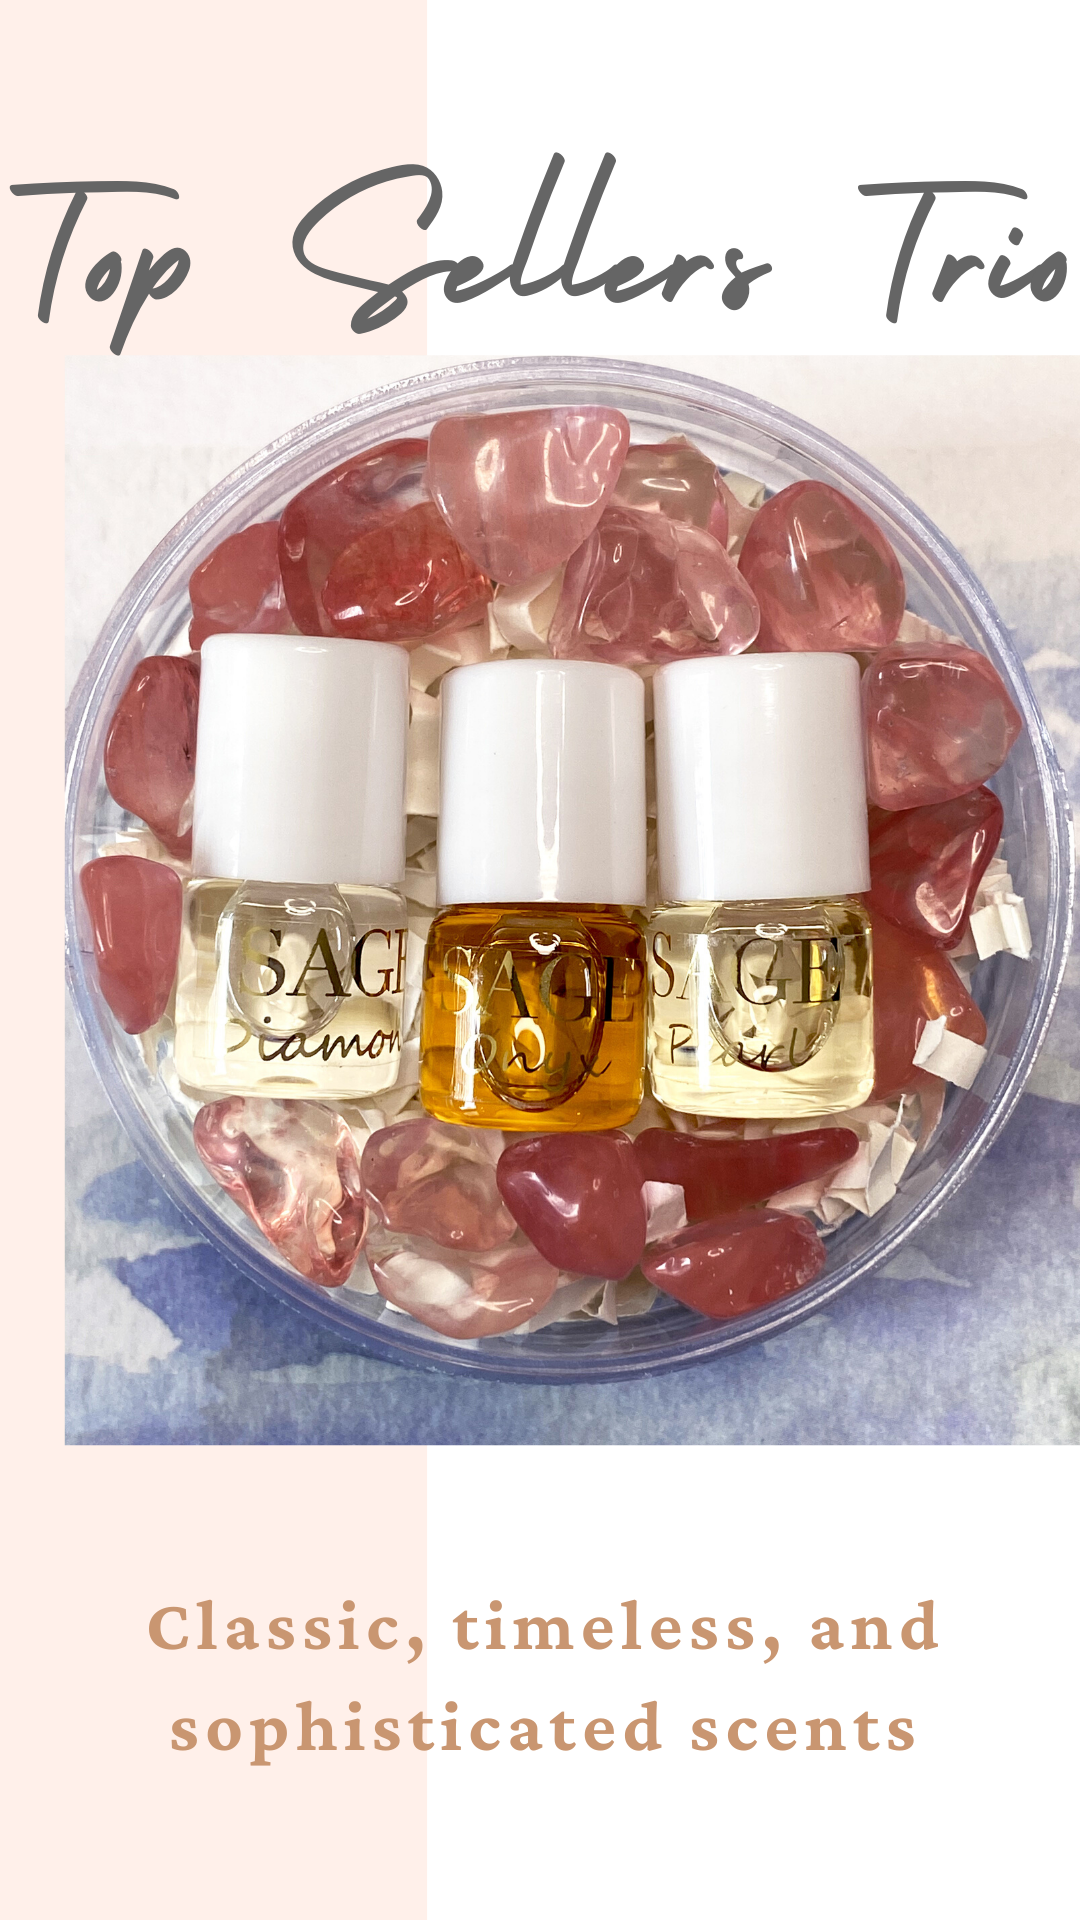 Words Top seller trio, Classic,timeless, and sophisticated scents. With image of mini rollie bottles Diamond onyx and pearl on pink gemstones in plastic container.